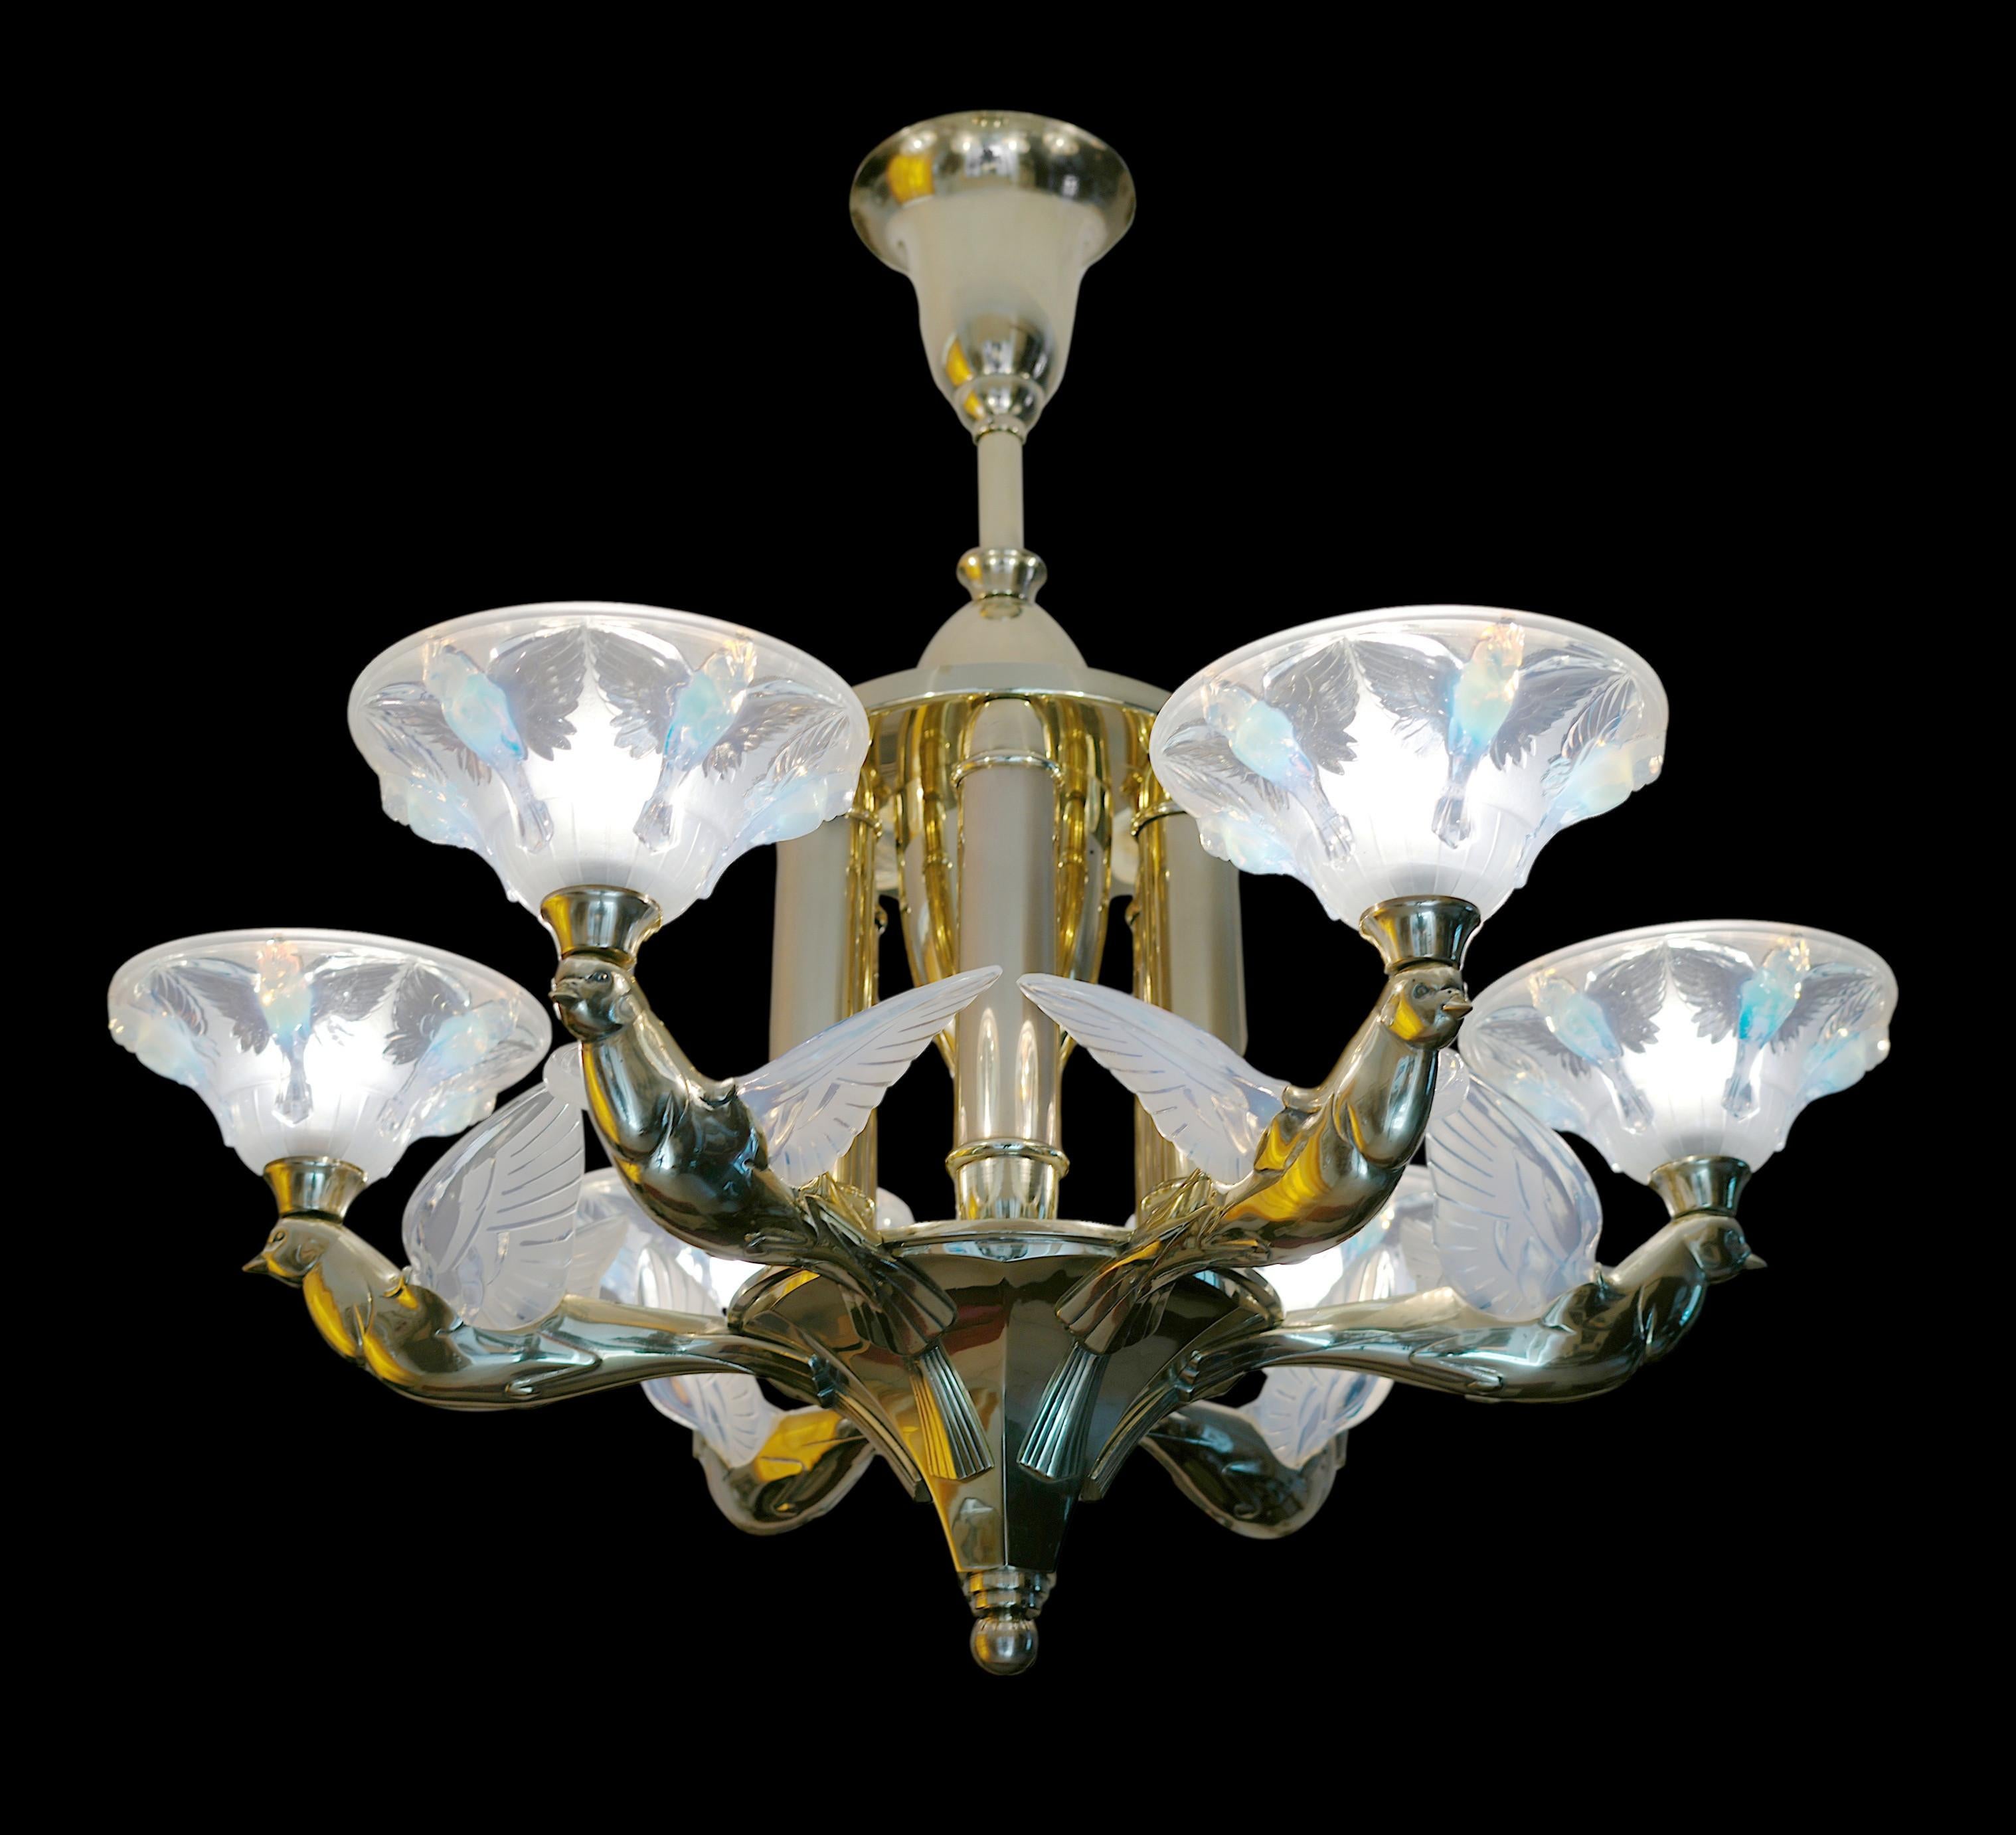 French Art Deco chandelier by Jean-Boris (Boris) Lacroix (Paris), France, 1930s. 6 thick opalescent molded glass shades with birds. Each resting on a bronze swallow with opalescent glass wings. Exceptional and very rare piece (maybe unique), the